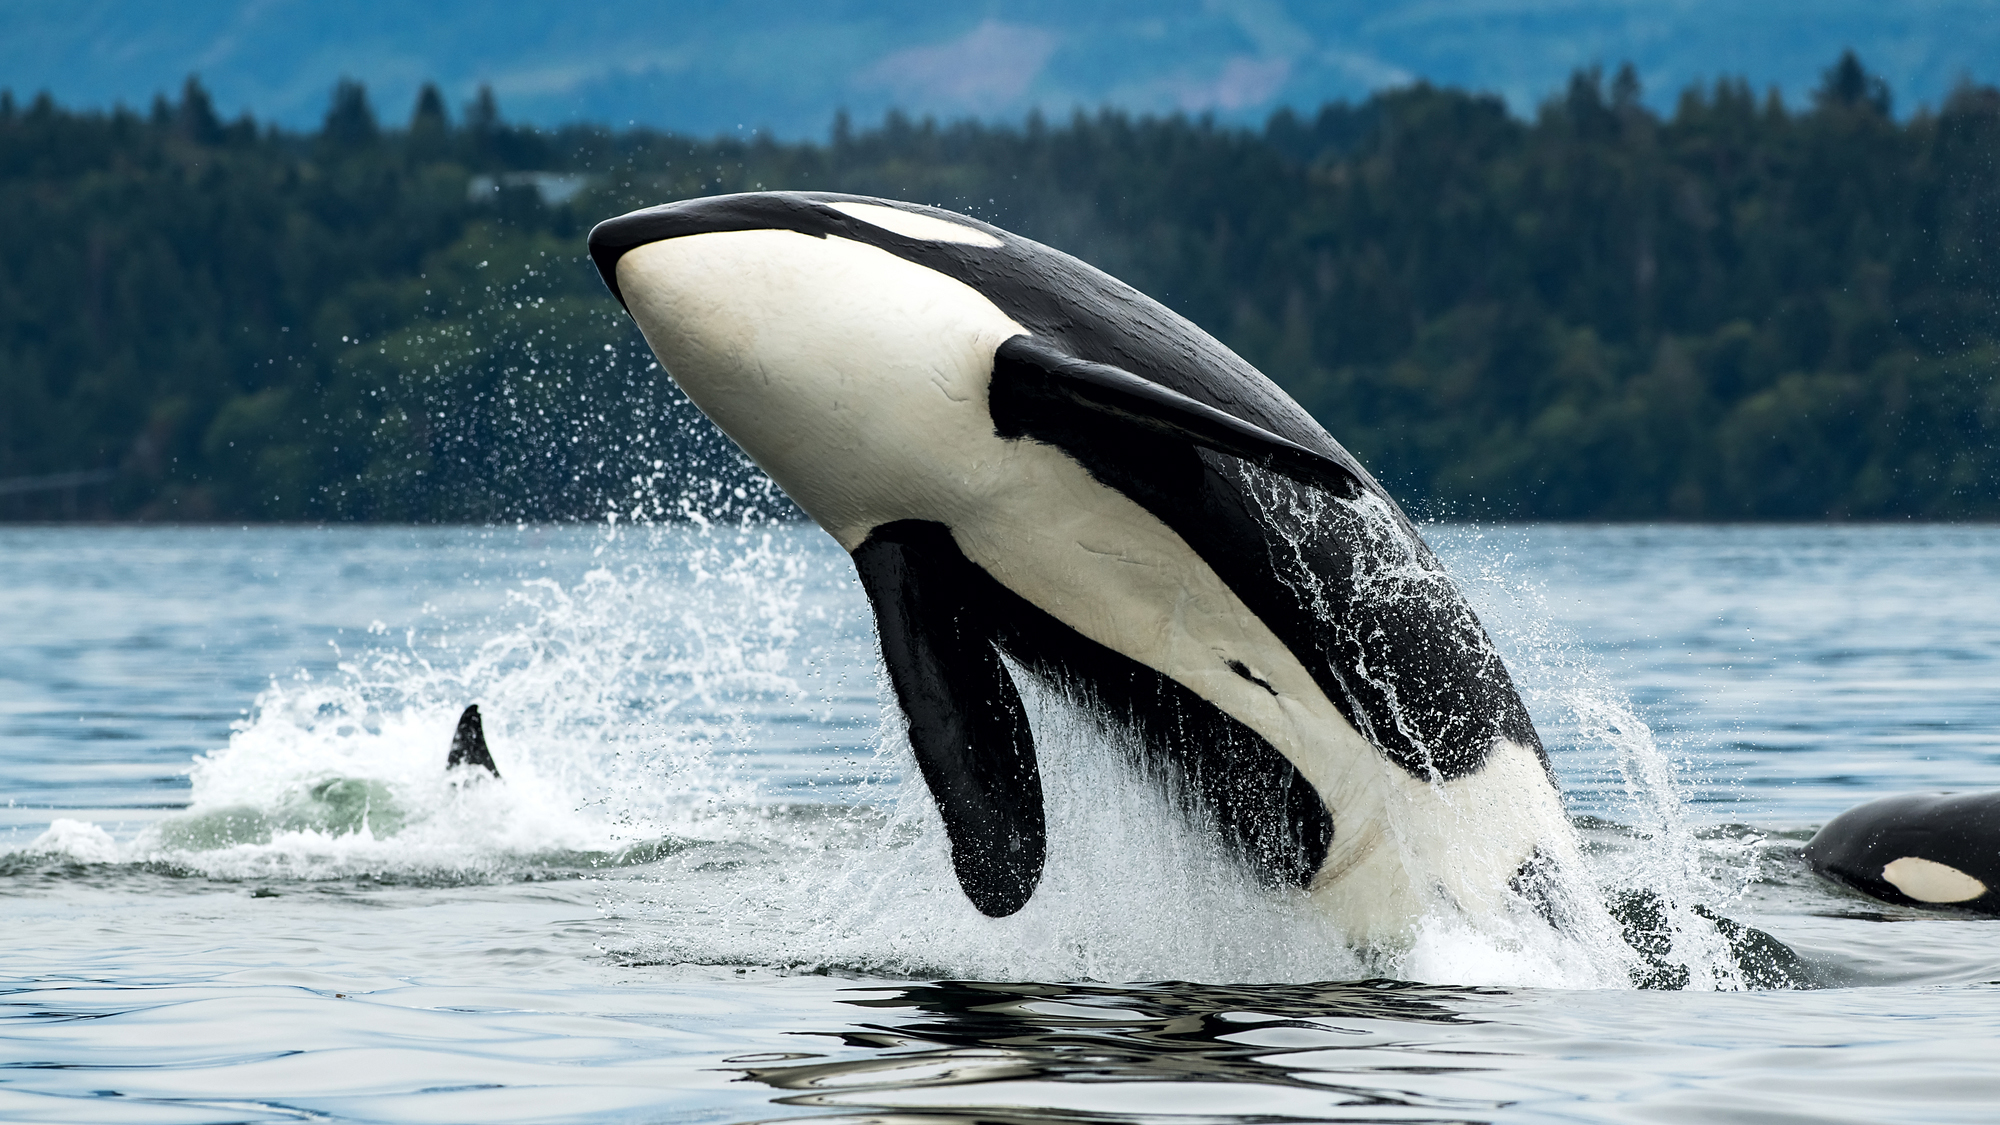 The fascinating truth about killer whales